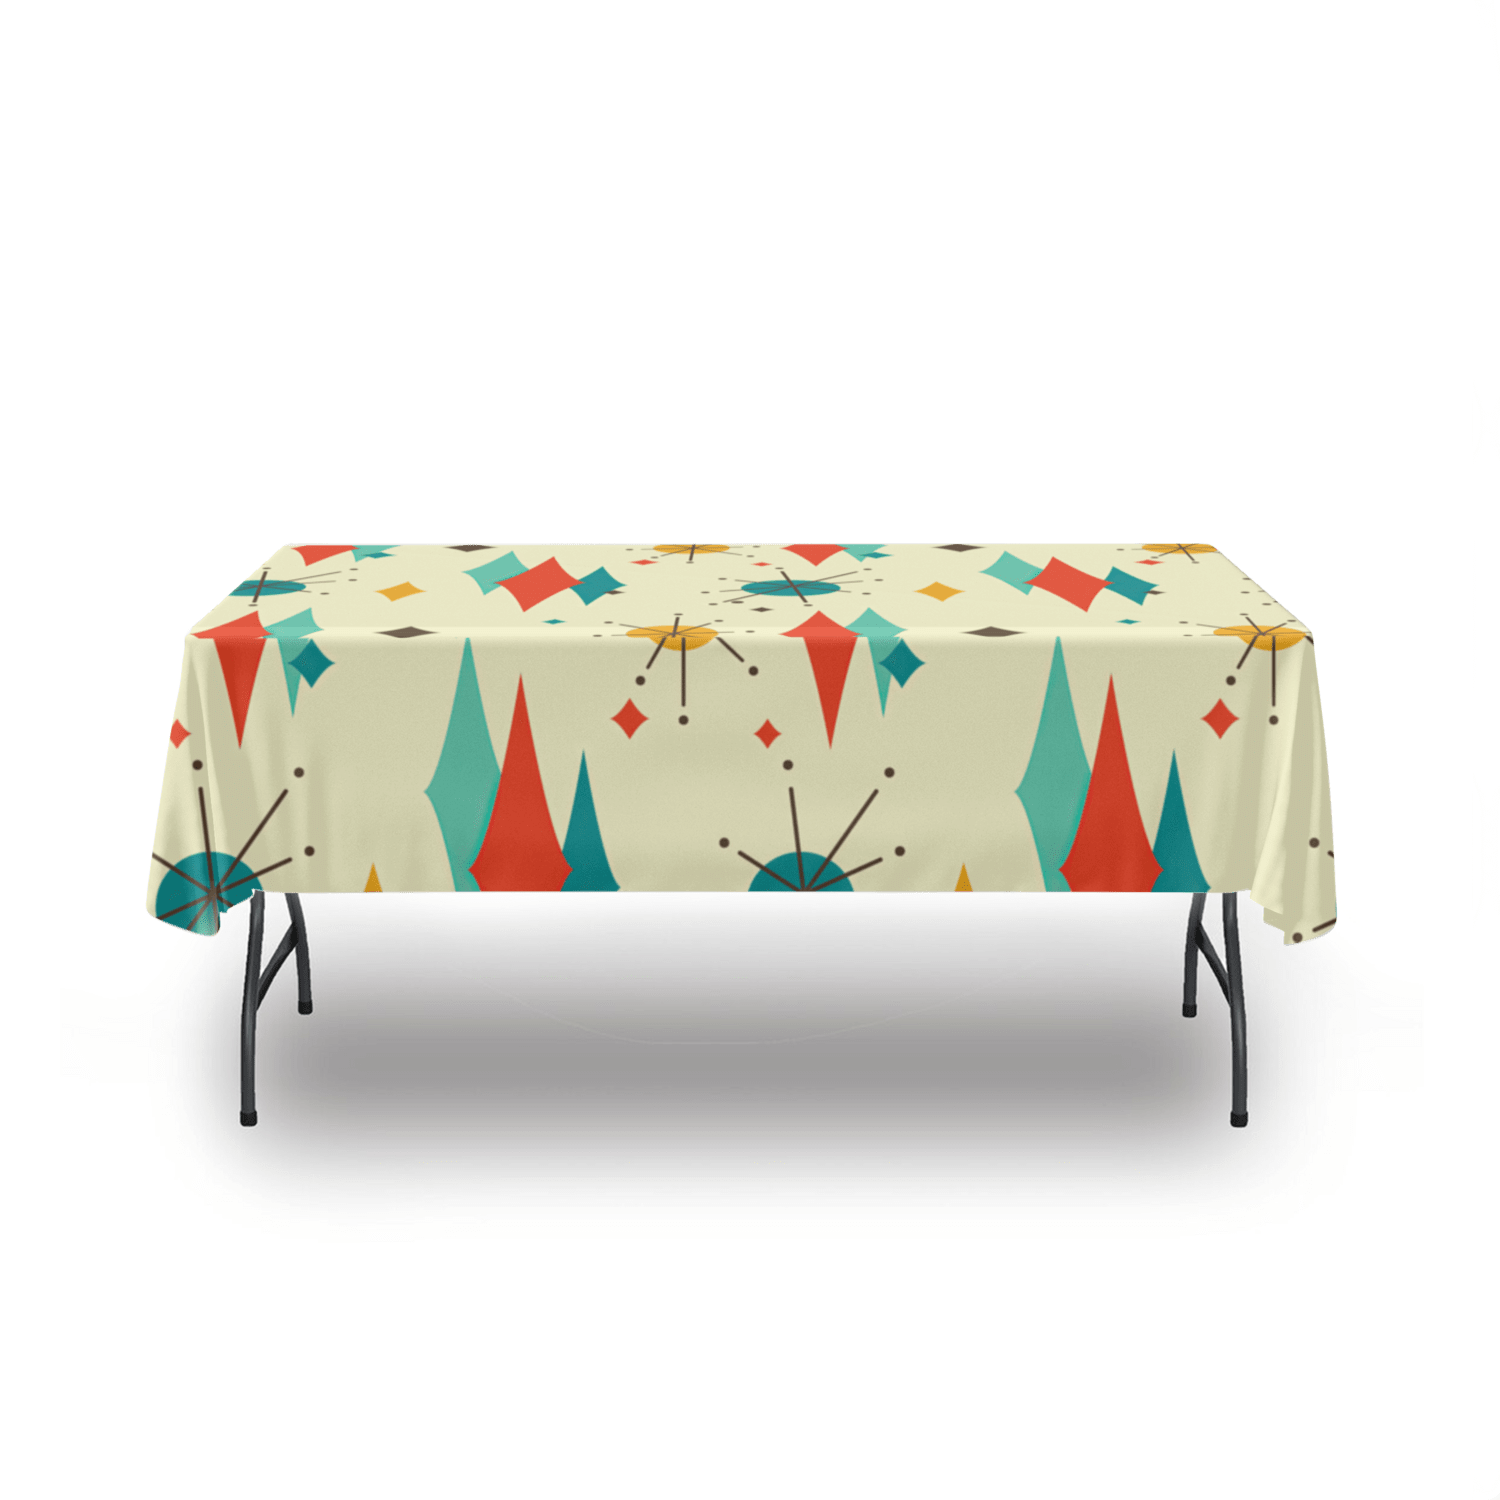 kate-mcenroe-nyc Franciscan Diamond Starburst Tablecloth, Mid Century Modern Table Cover Tablecloths 54&quot; x 72&quot; 108435